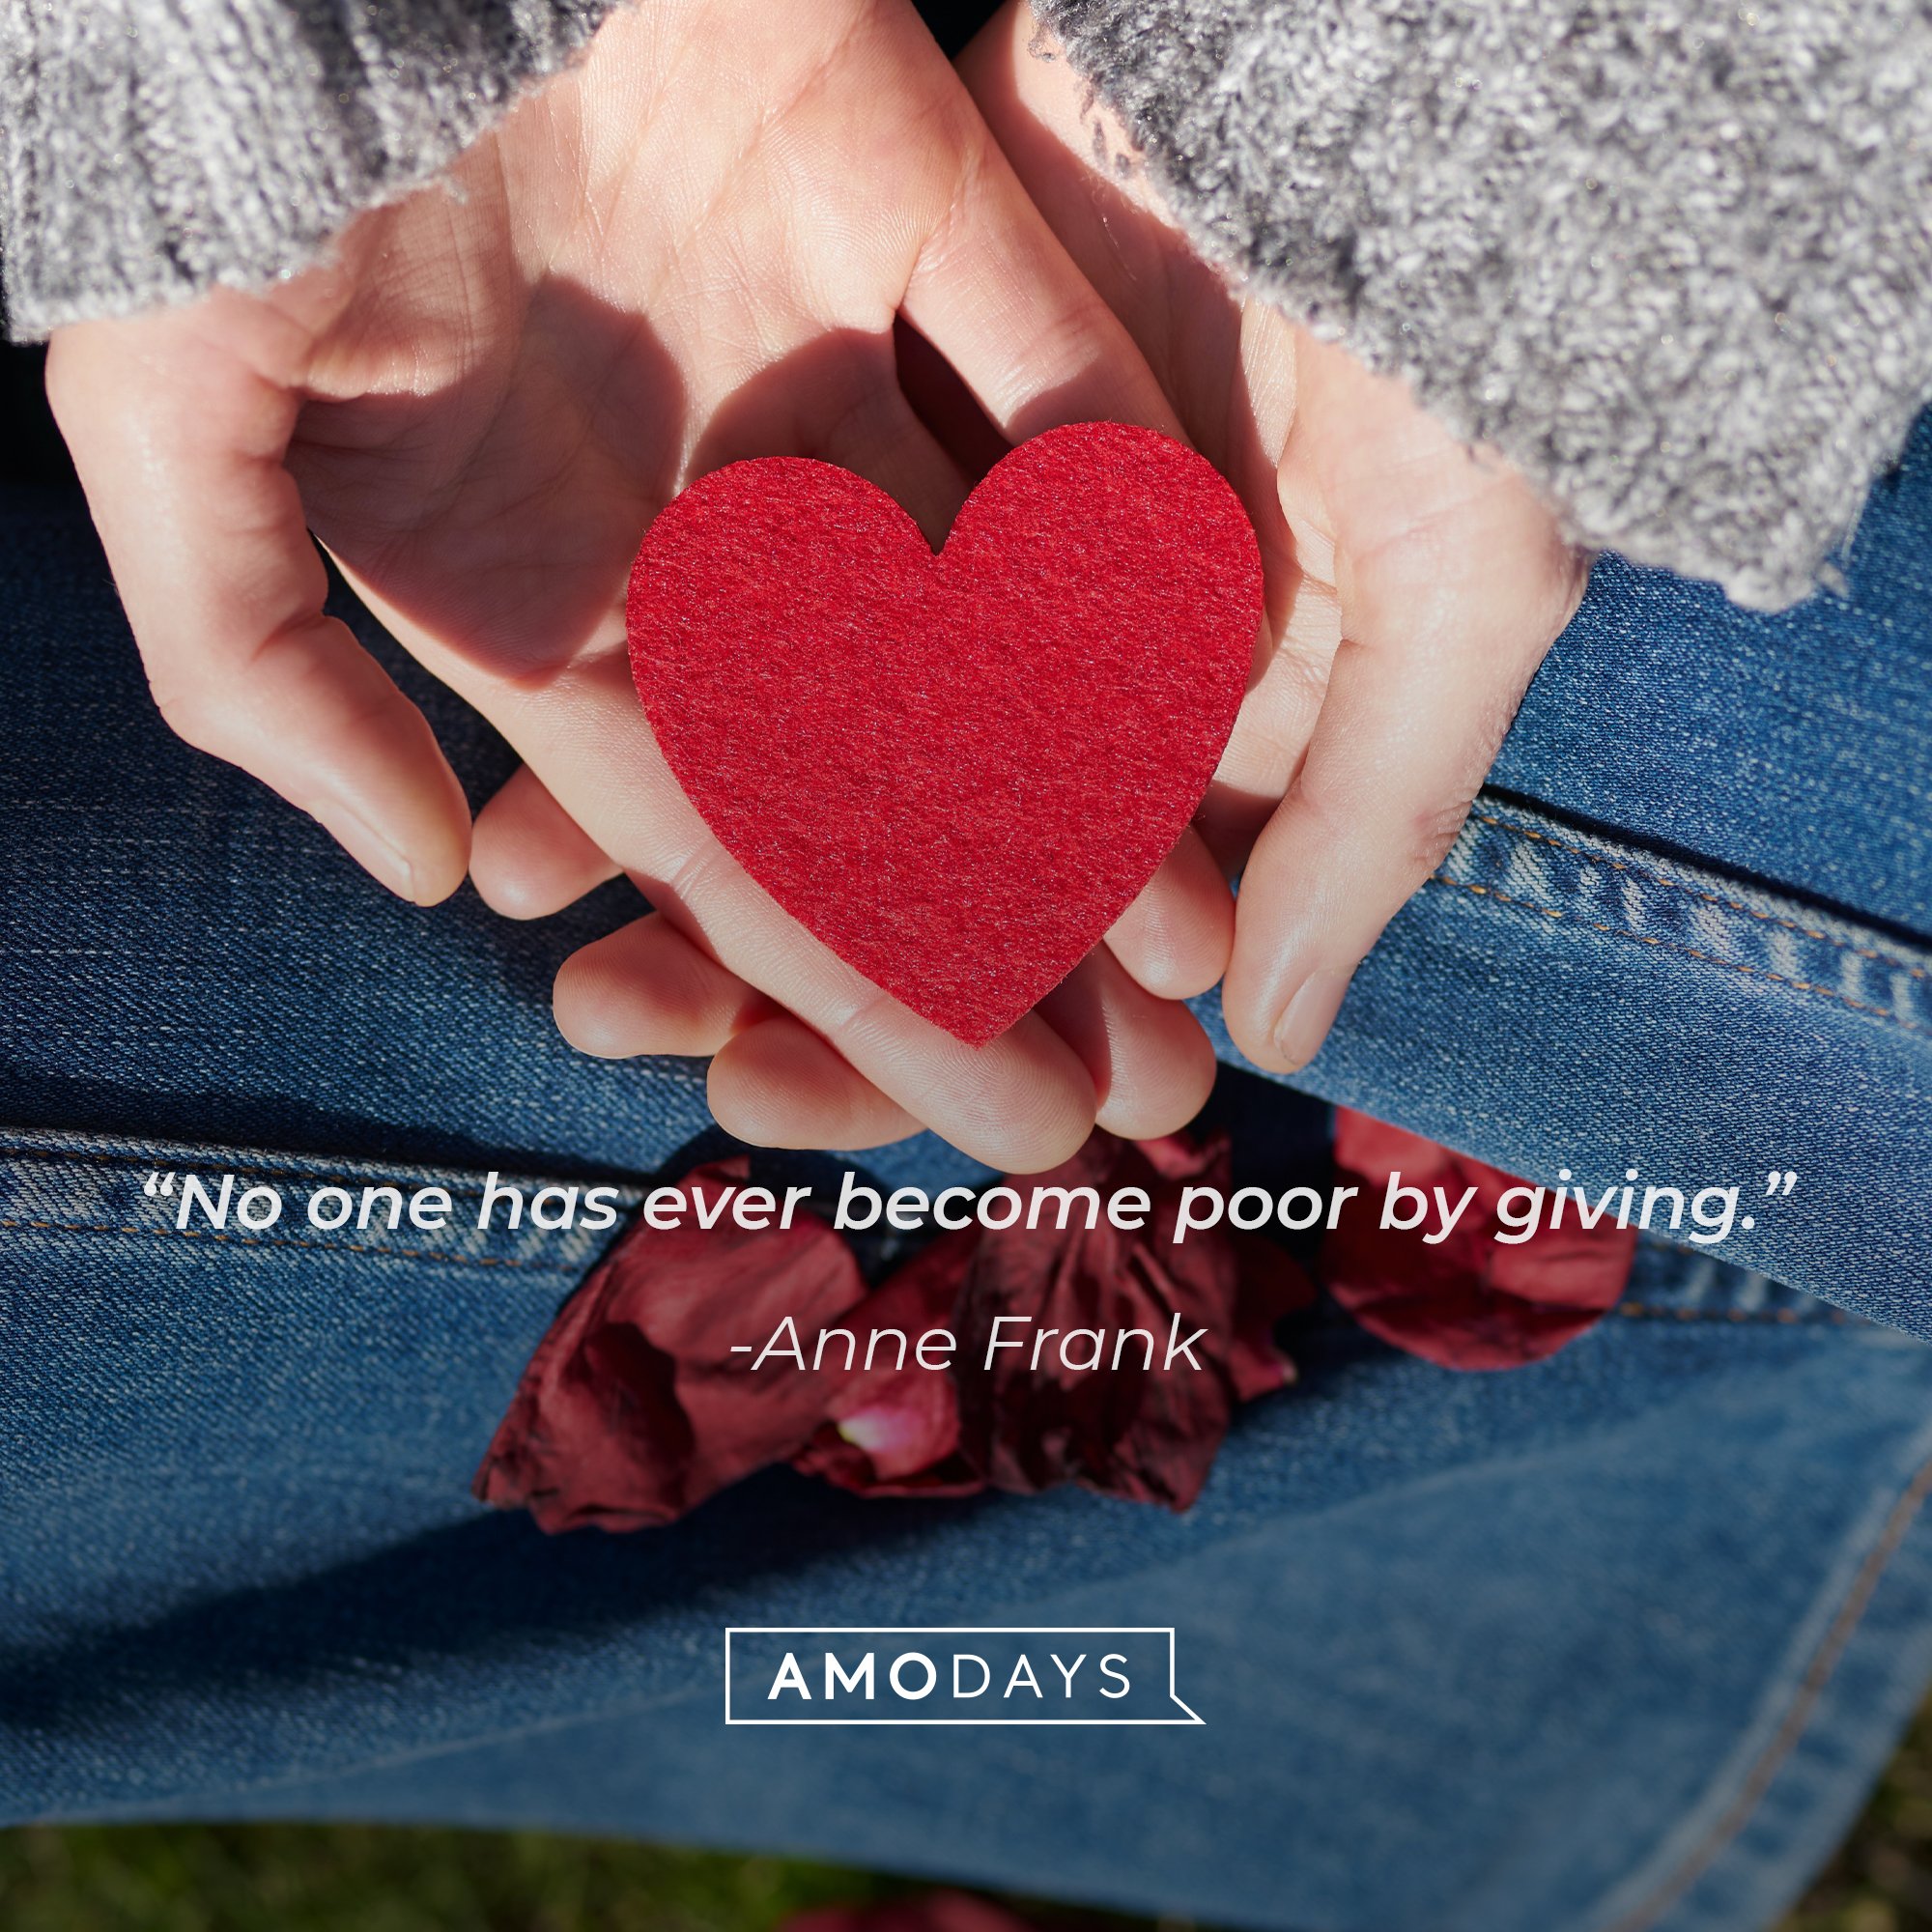 Anne Frank's quote: "No one has ever become poor by giving." | Image: AmoDays